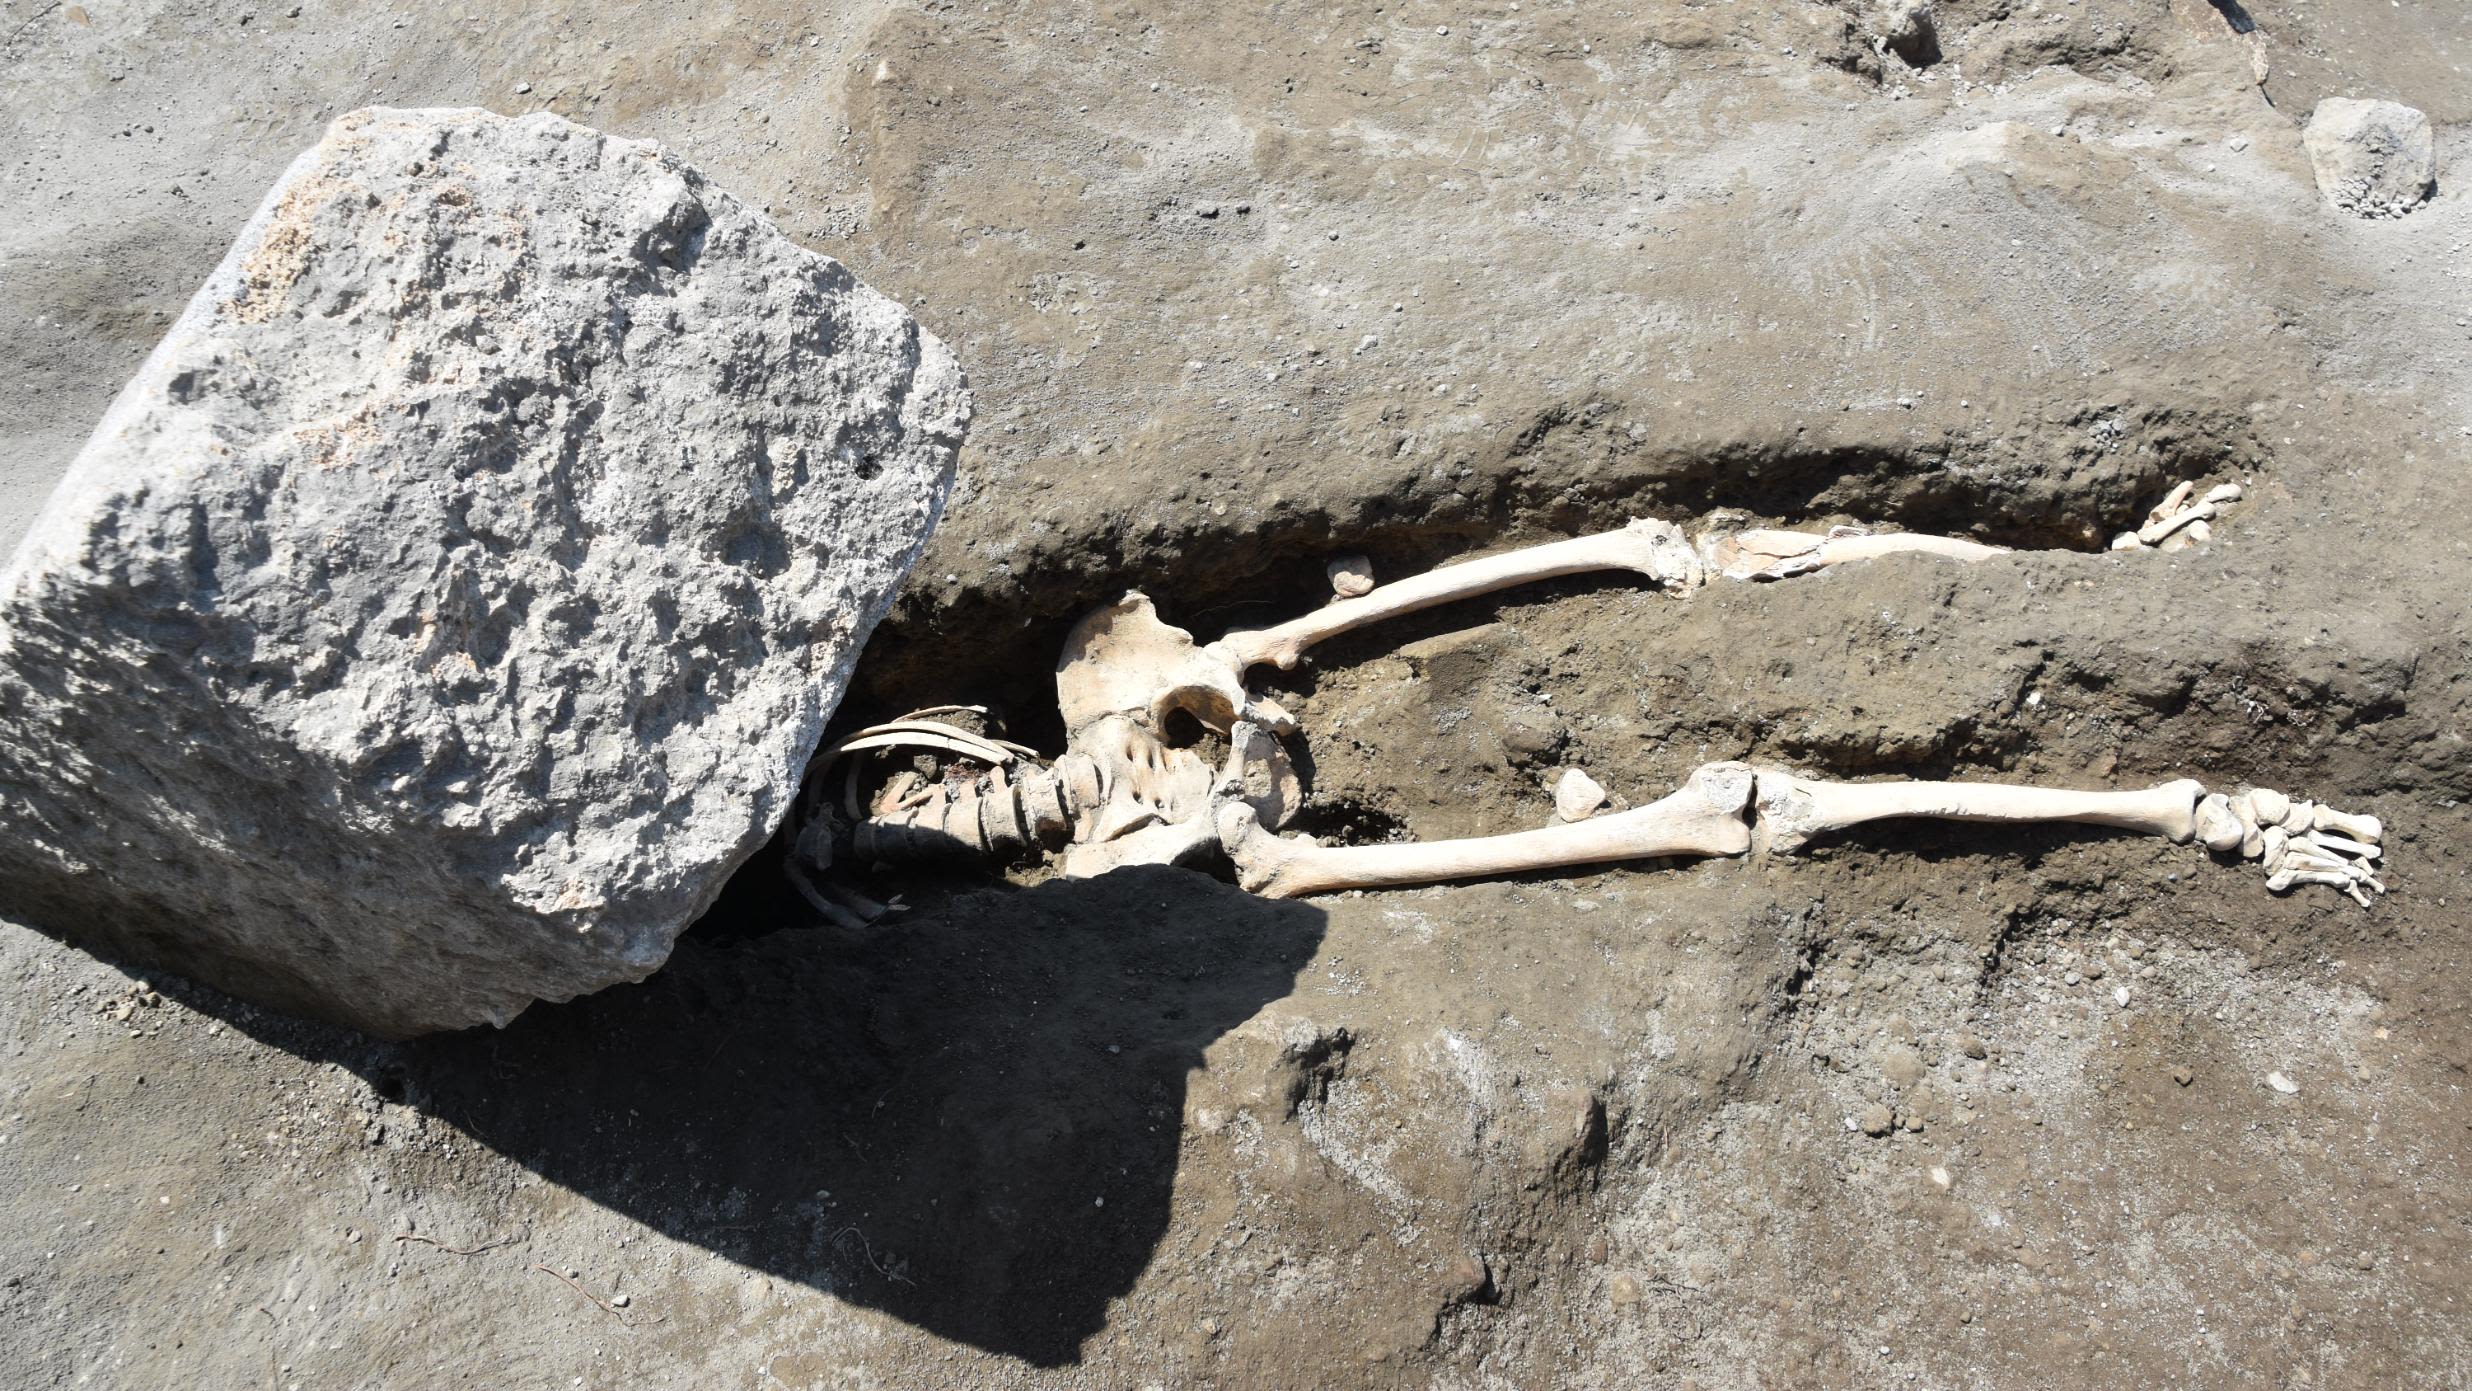 Archaeologists uncover remains of man crushed while fleeing Pompeii | CNN